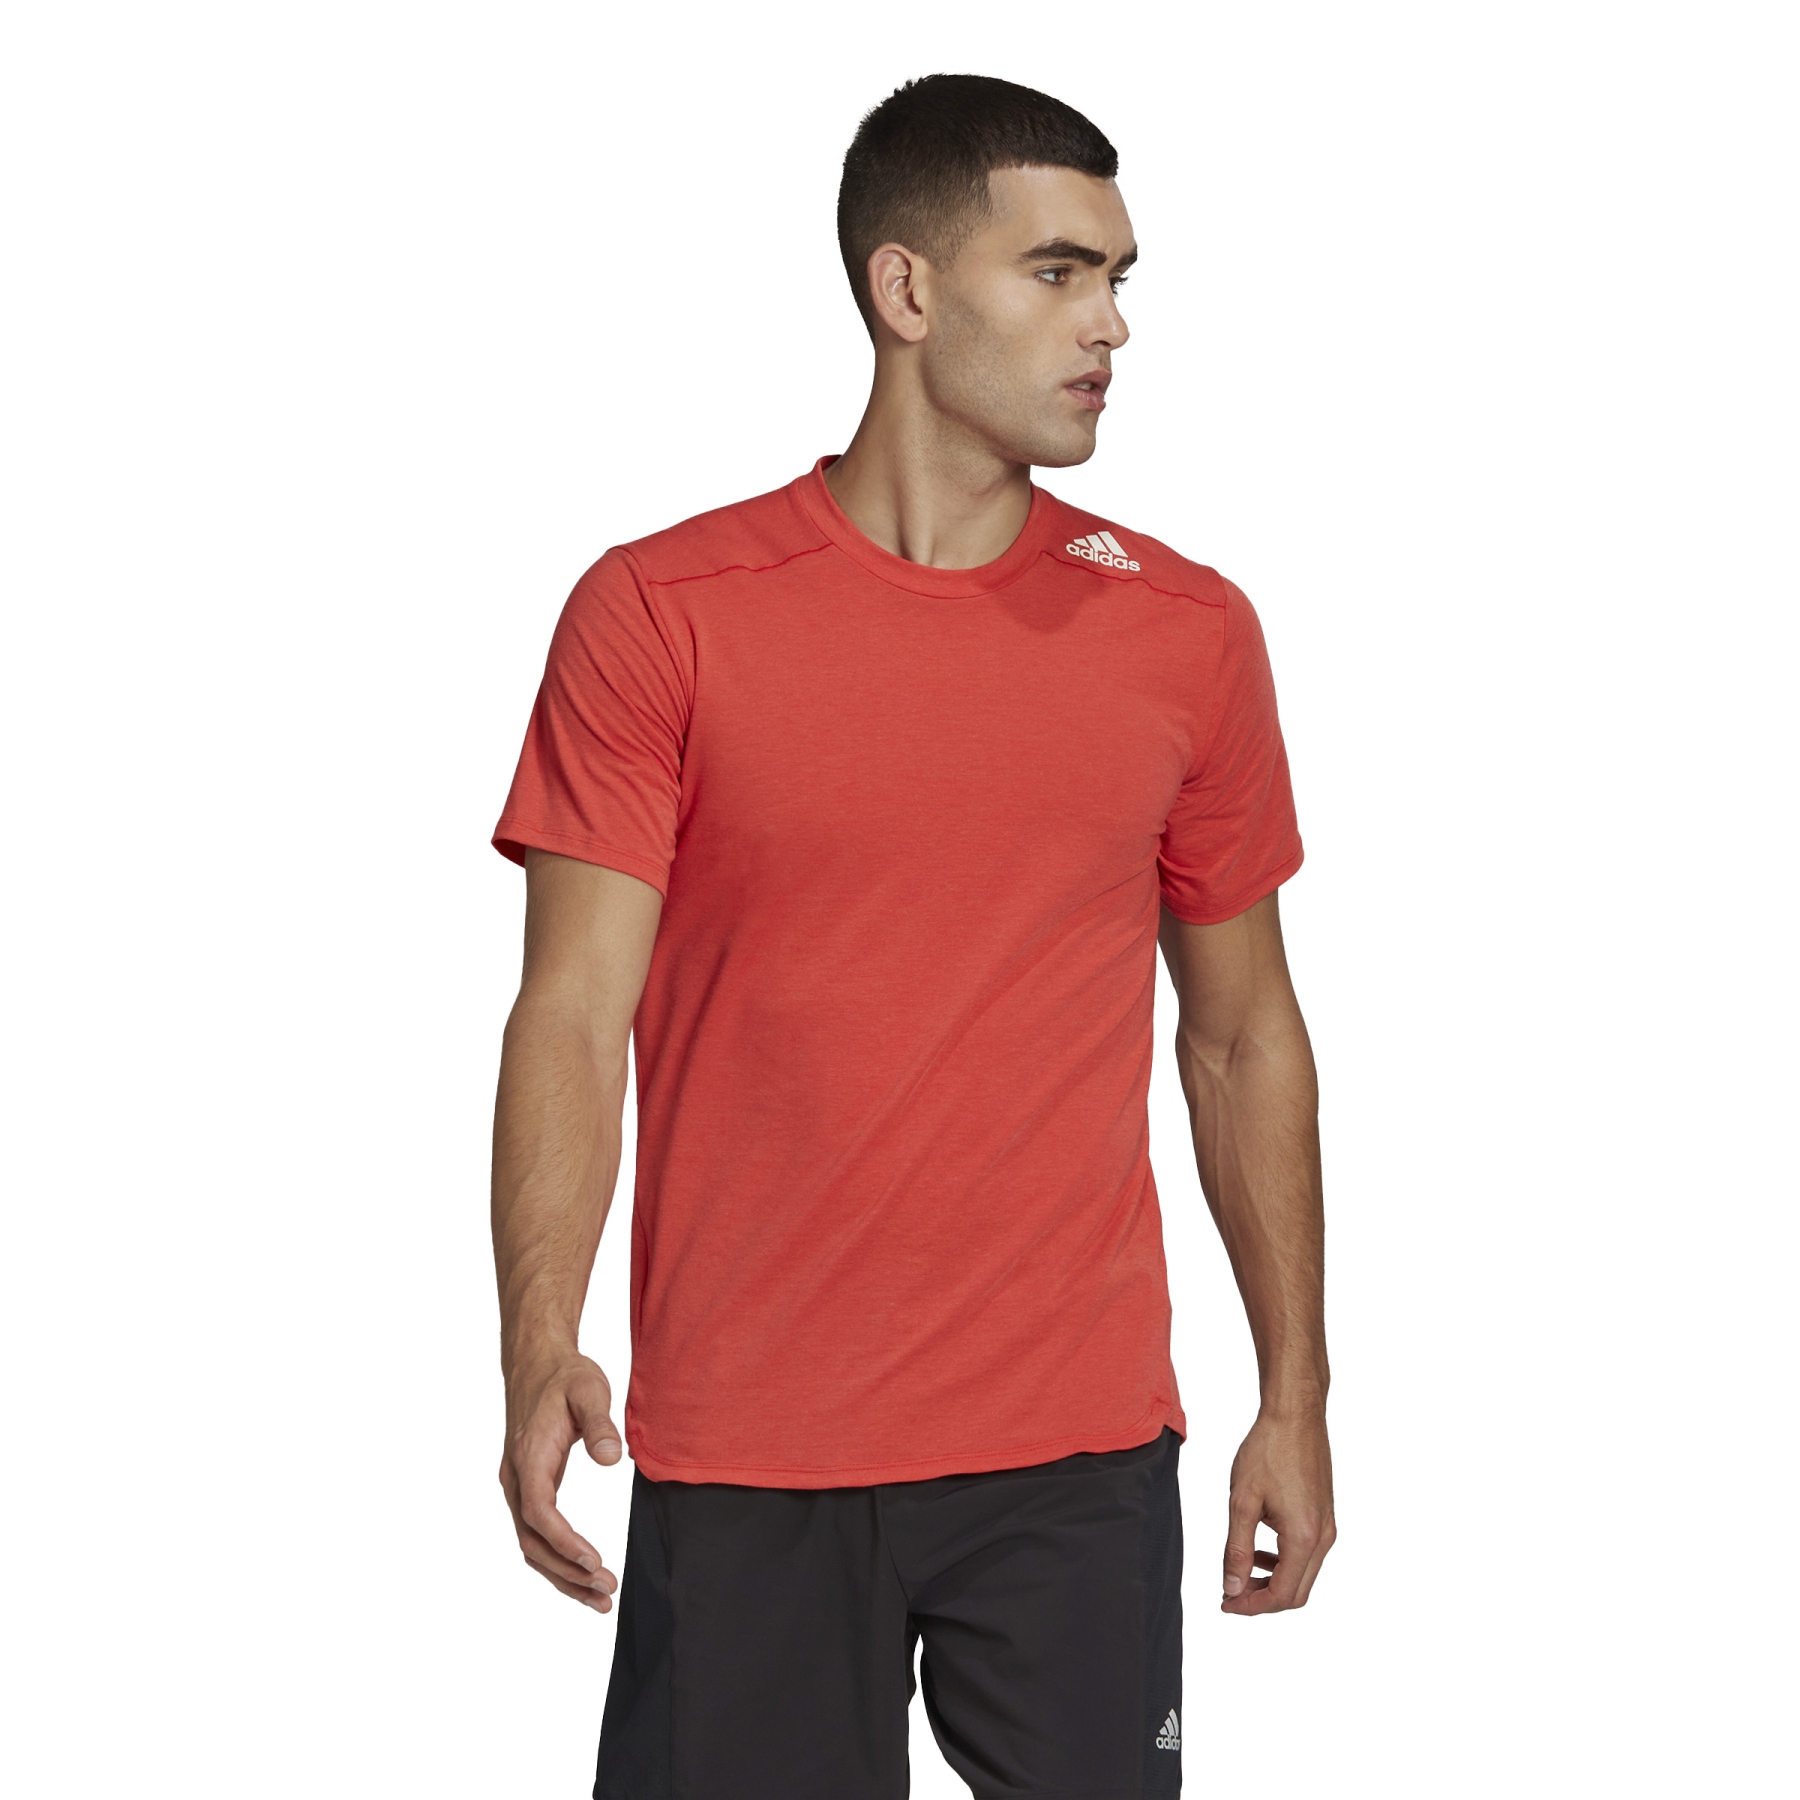 Image of adidas Men's Designed for Training Tee - vivid red HB9197